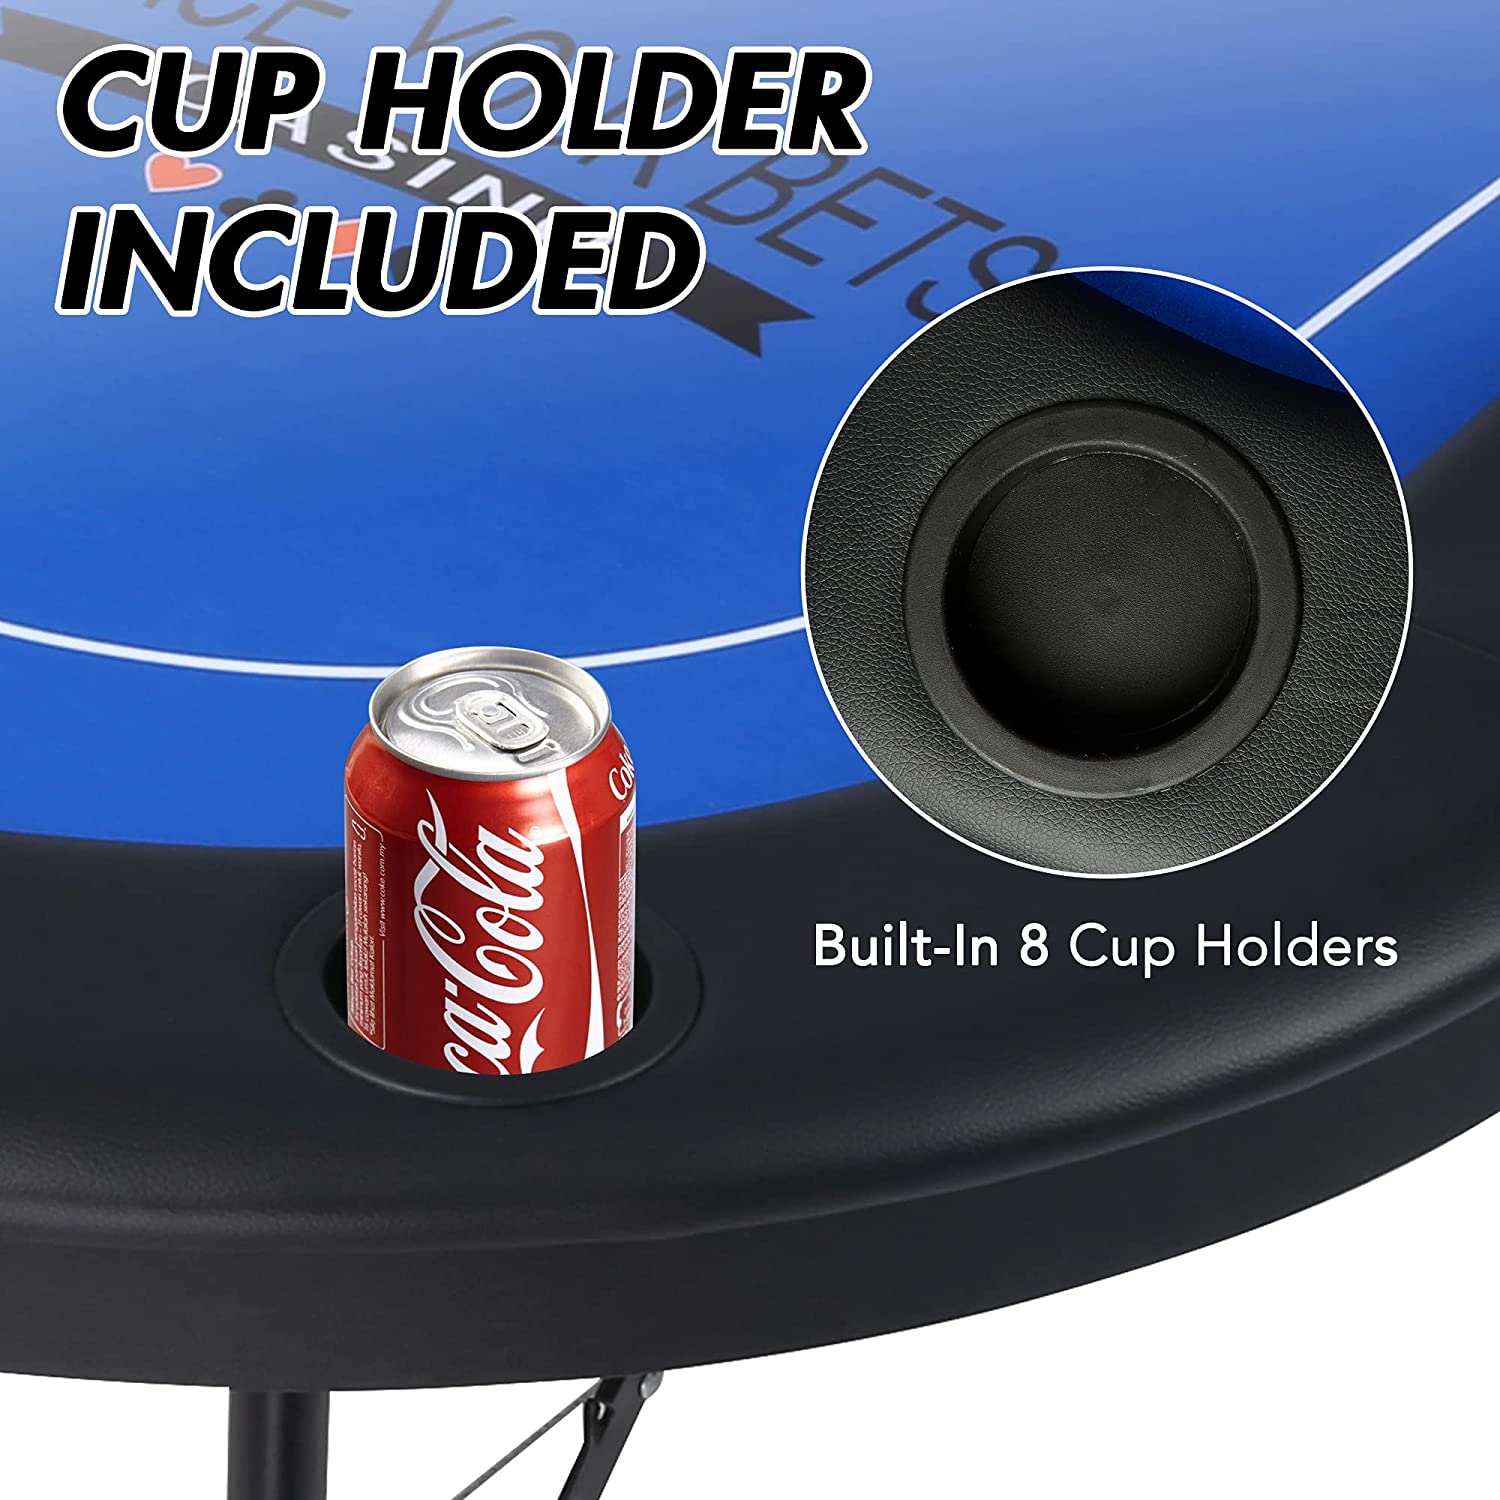 Foldable 6-8 Players Poker Table Texas Holdem Poker Casino Games w/ Faux Leather Padded Rails and Cup Holders, Blue